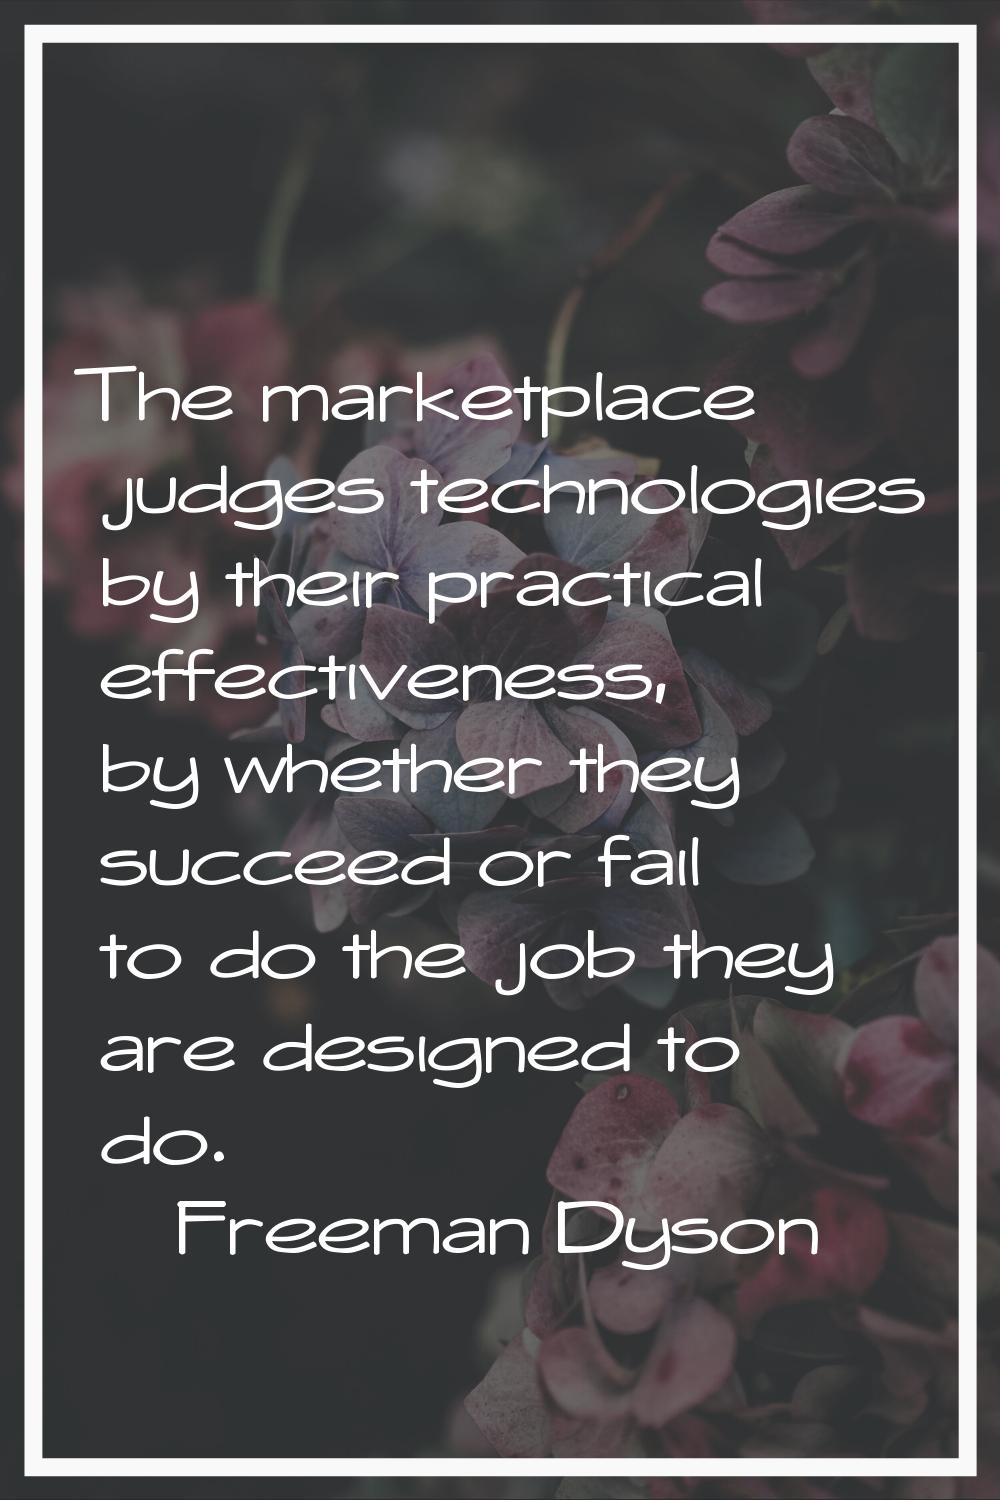 The marketplace judges technologies by their practical effectiveness, by whether they succeed or fa